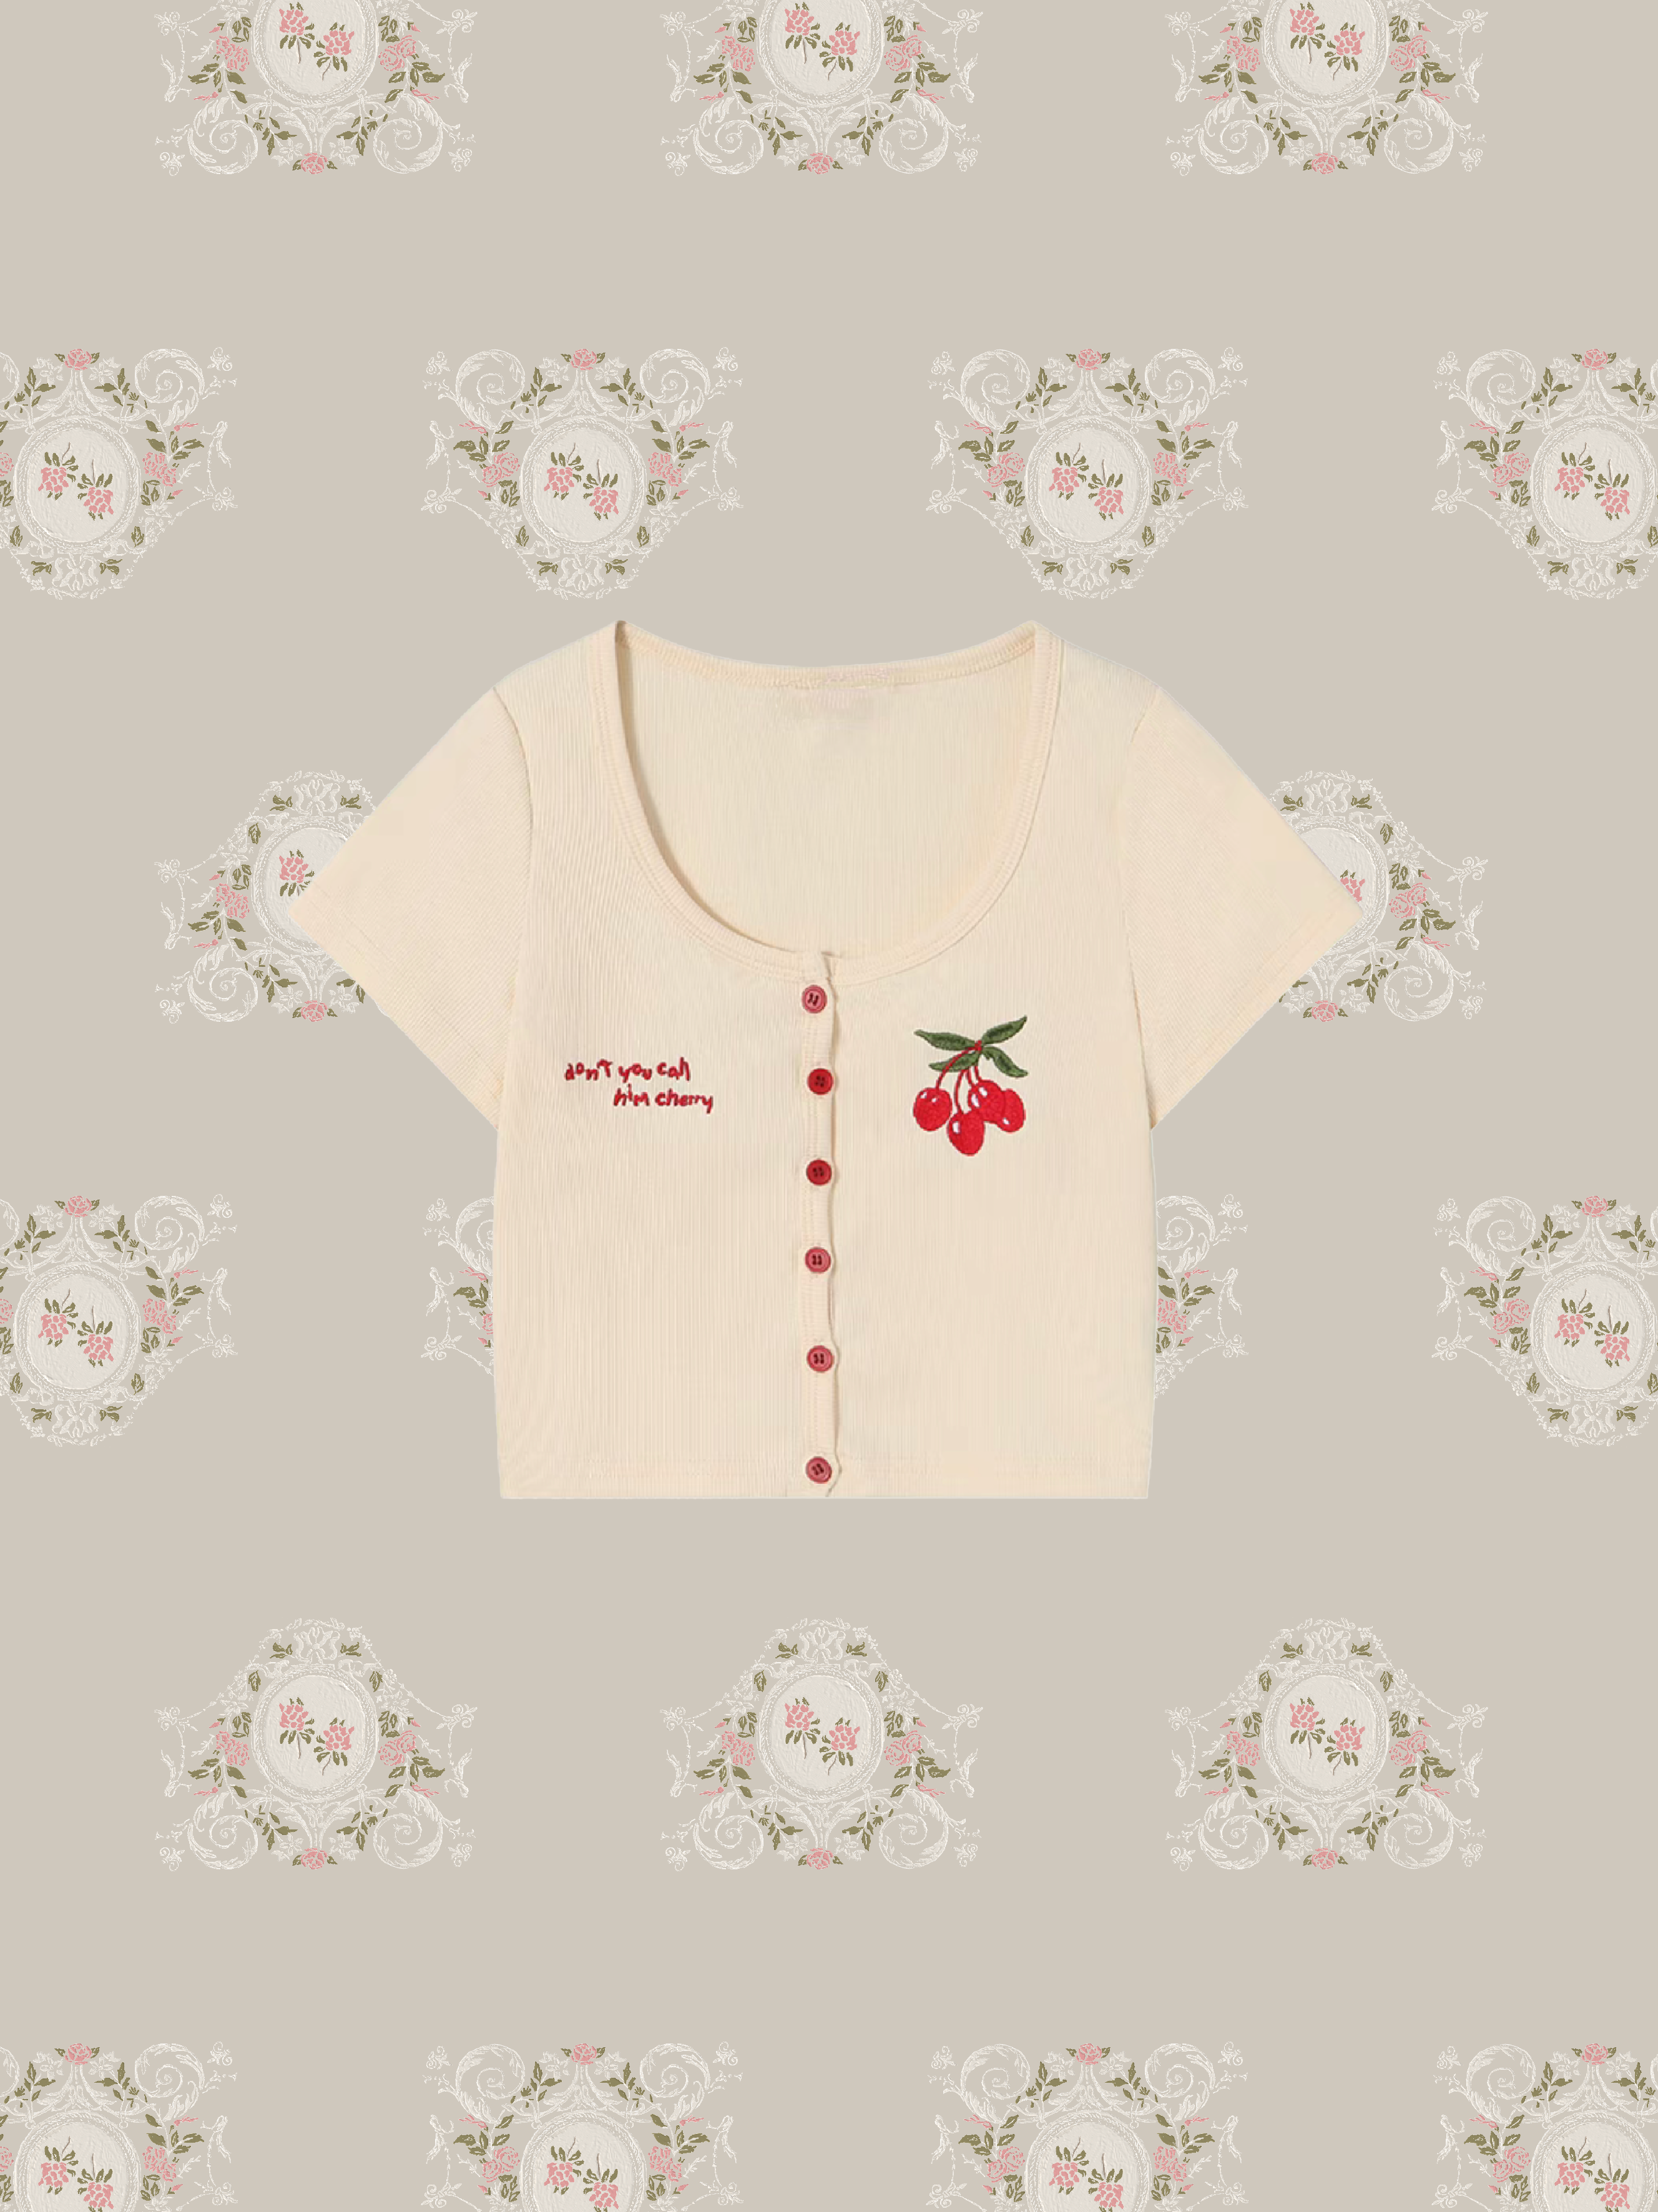 Cherry Embroidered Top/チェリー刺繍トップス.